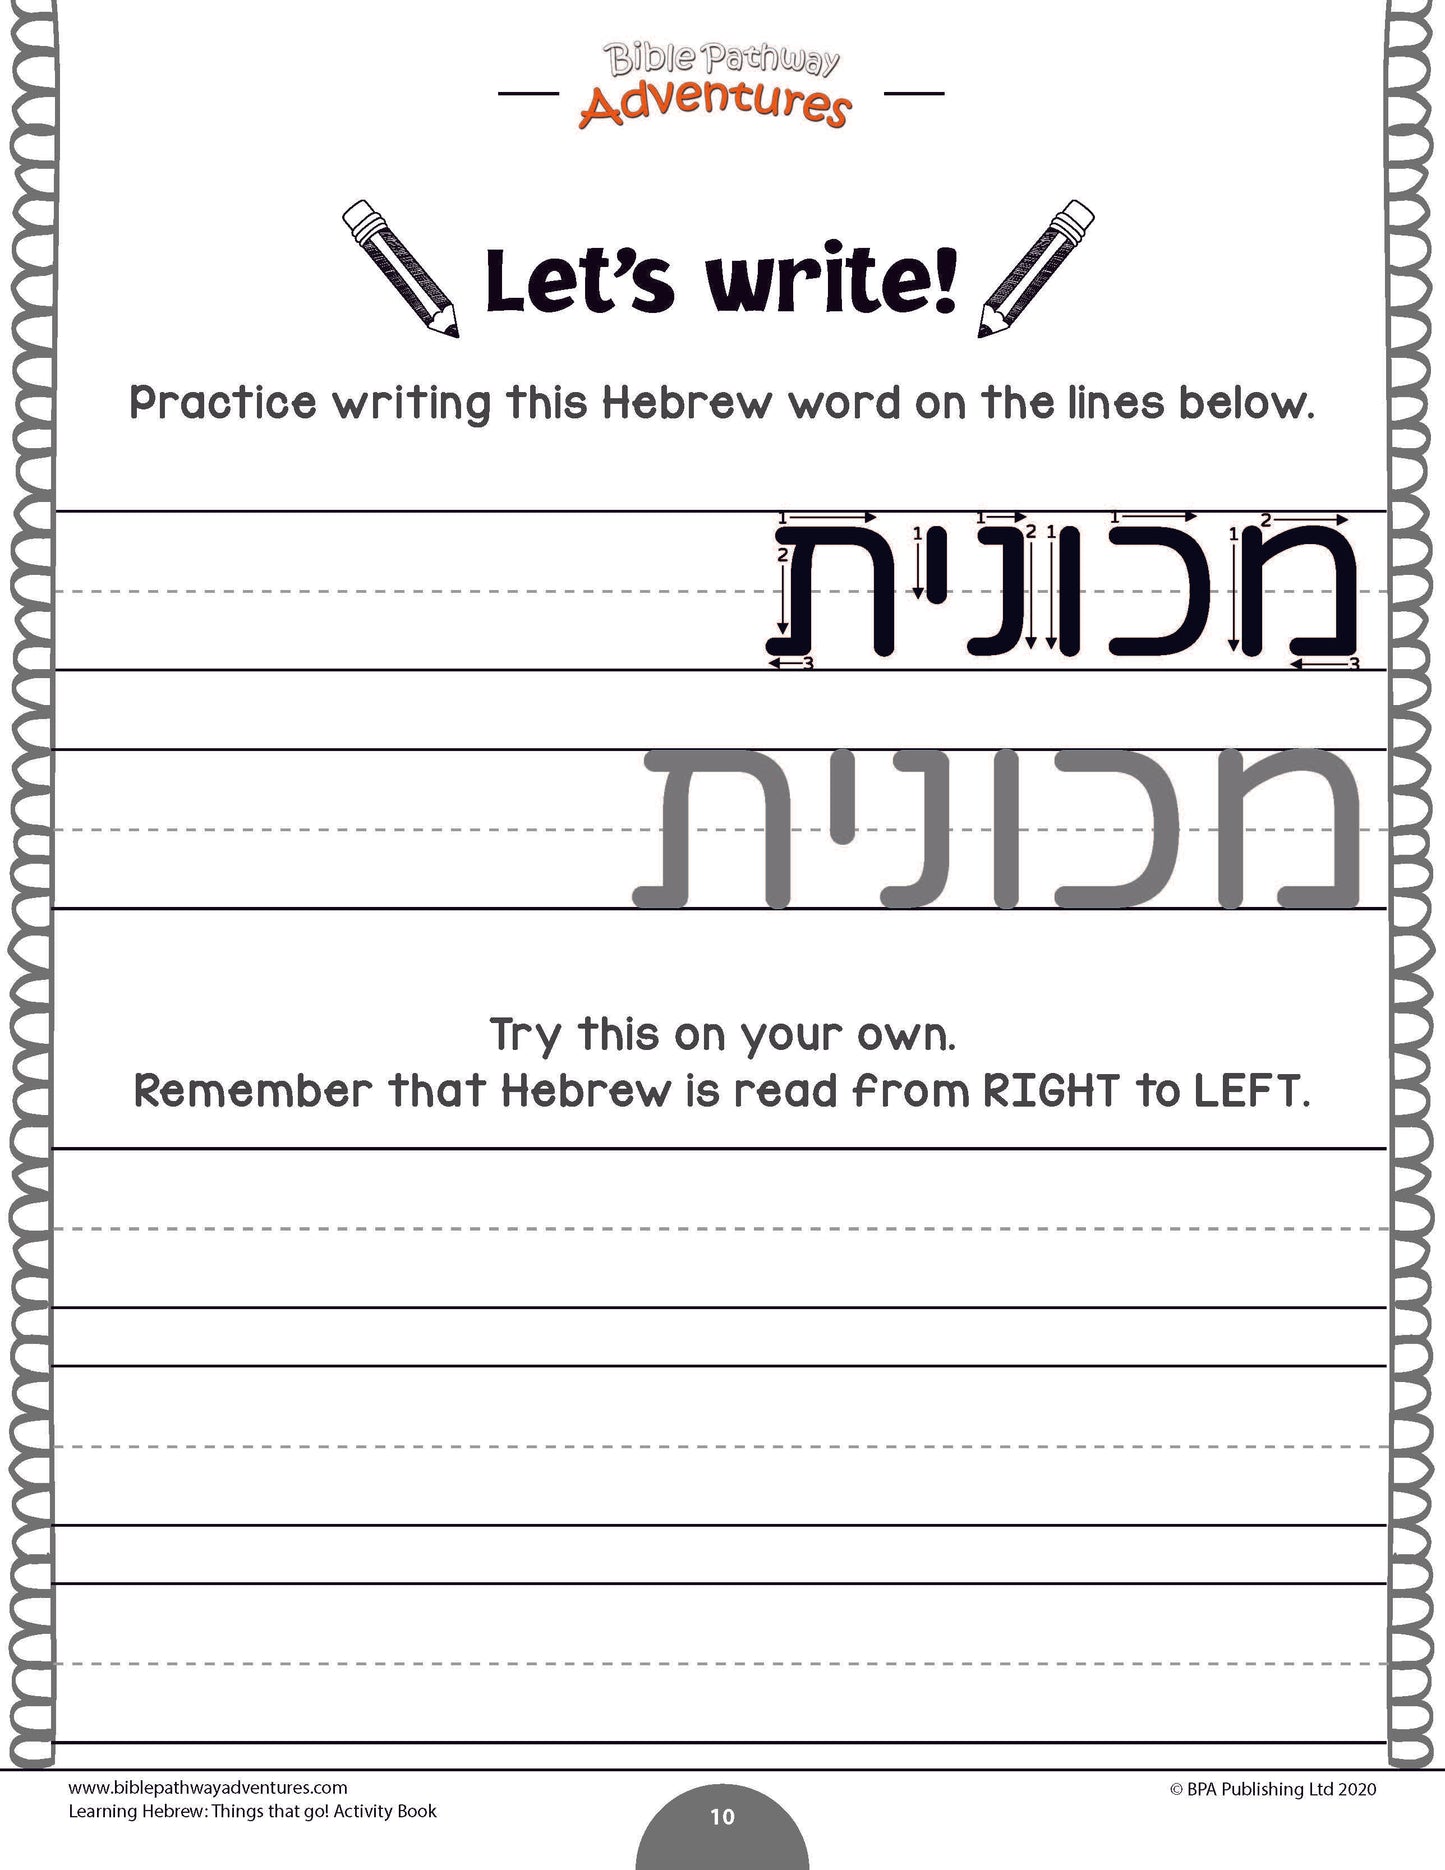 Learning Hebrew: Things that Go! Activity Book